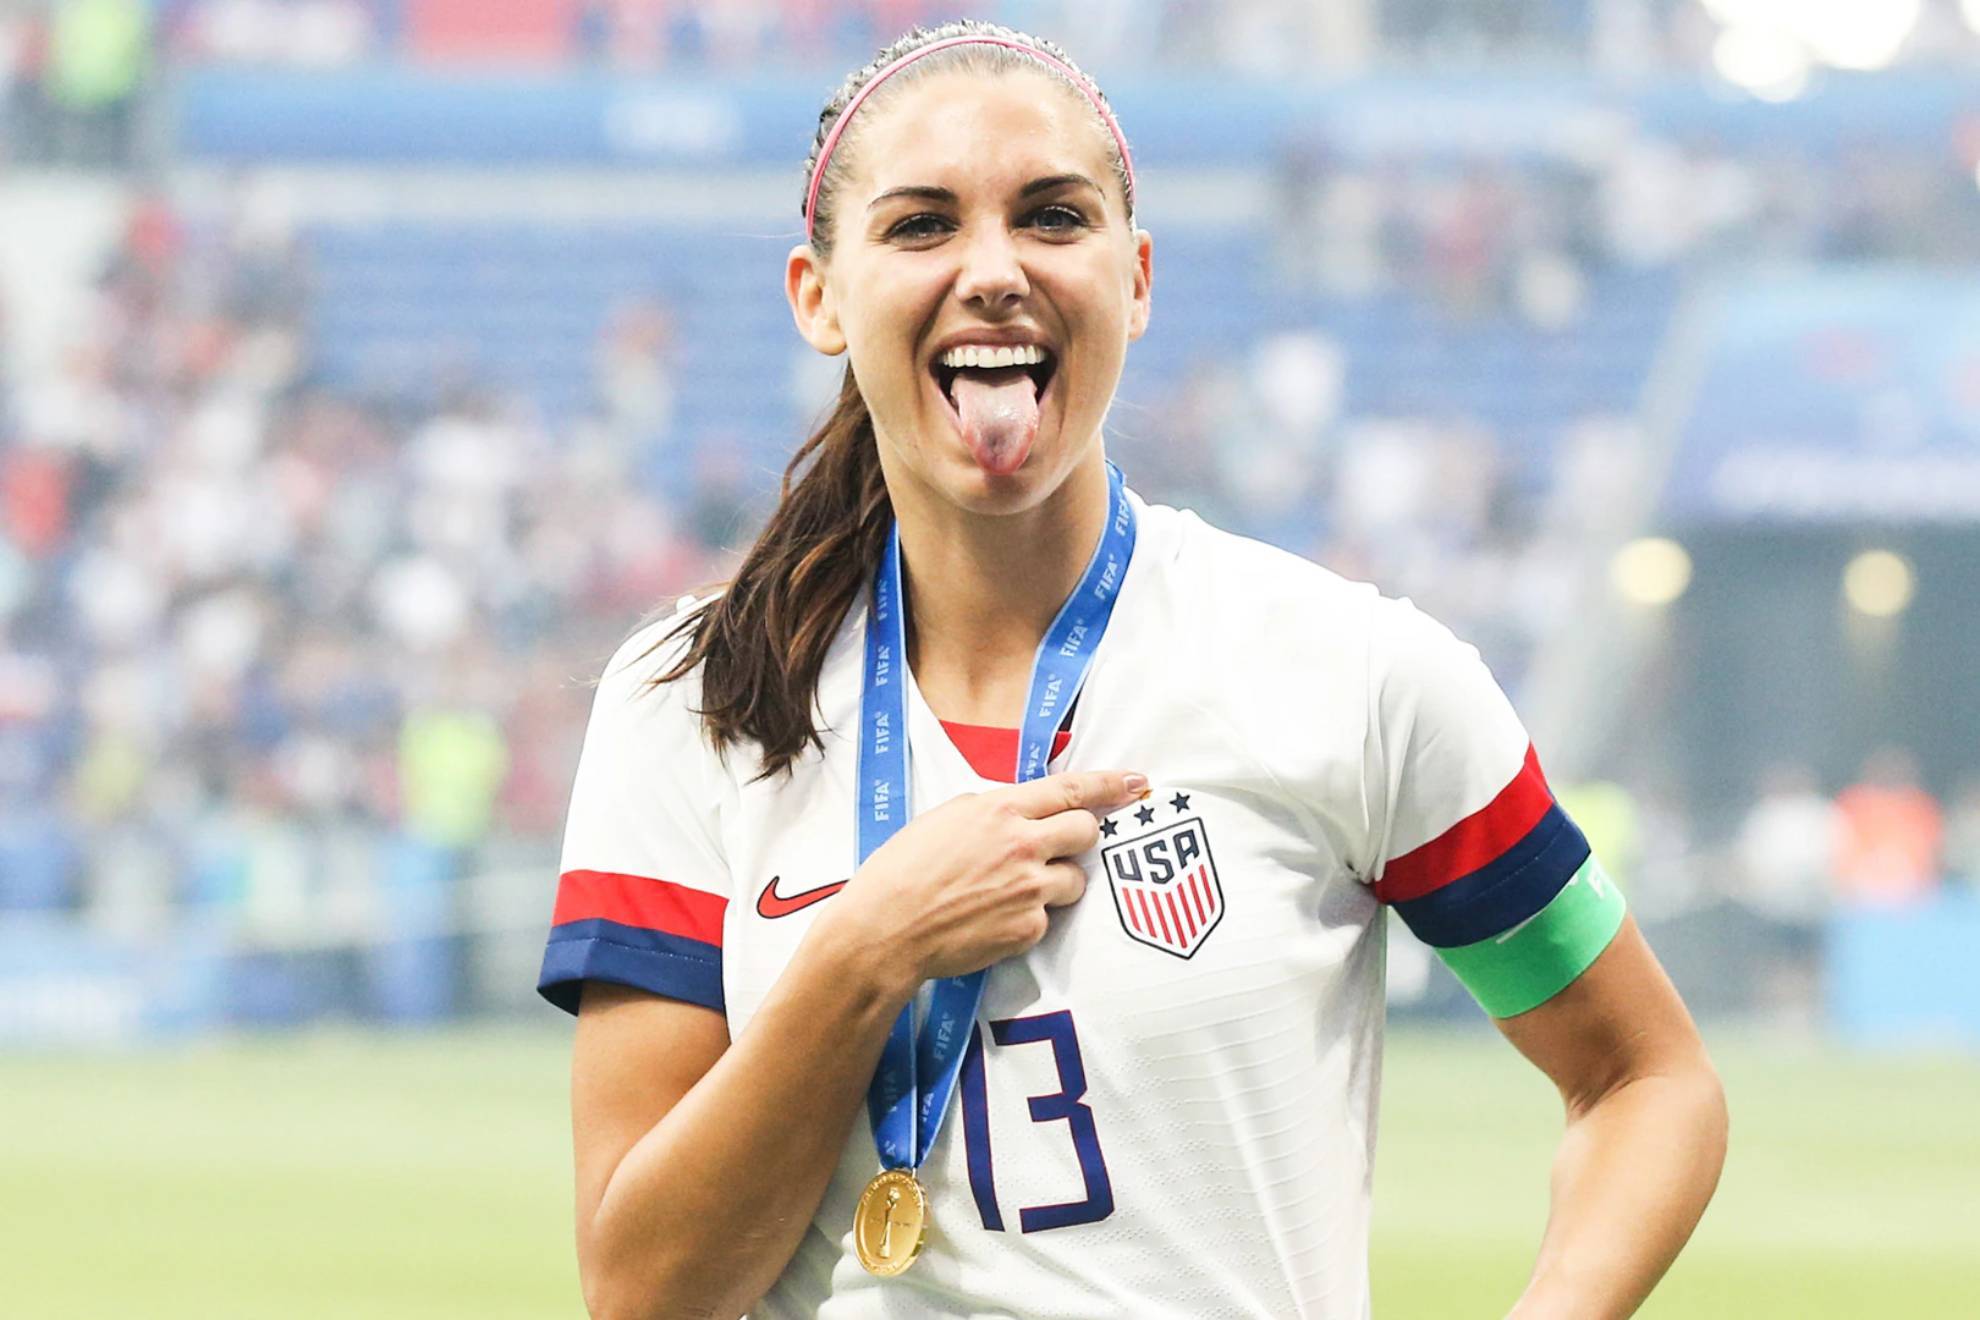 Alex Morgan affirms there's 'still work to be done' despite recent 'progress' being made in Women's soccer